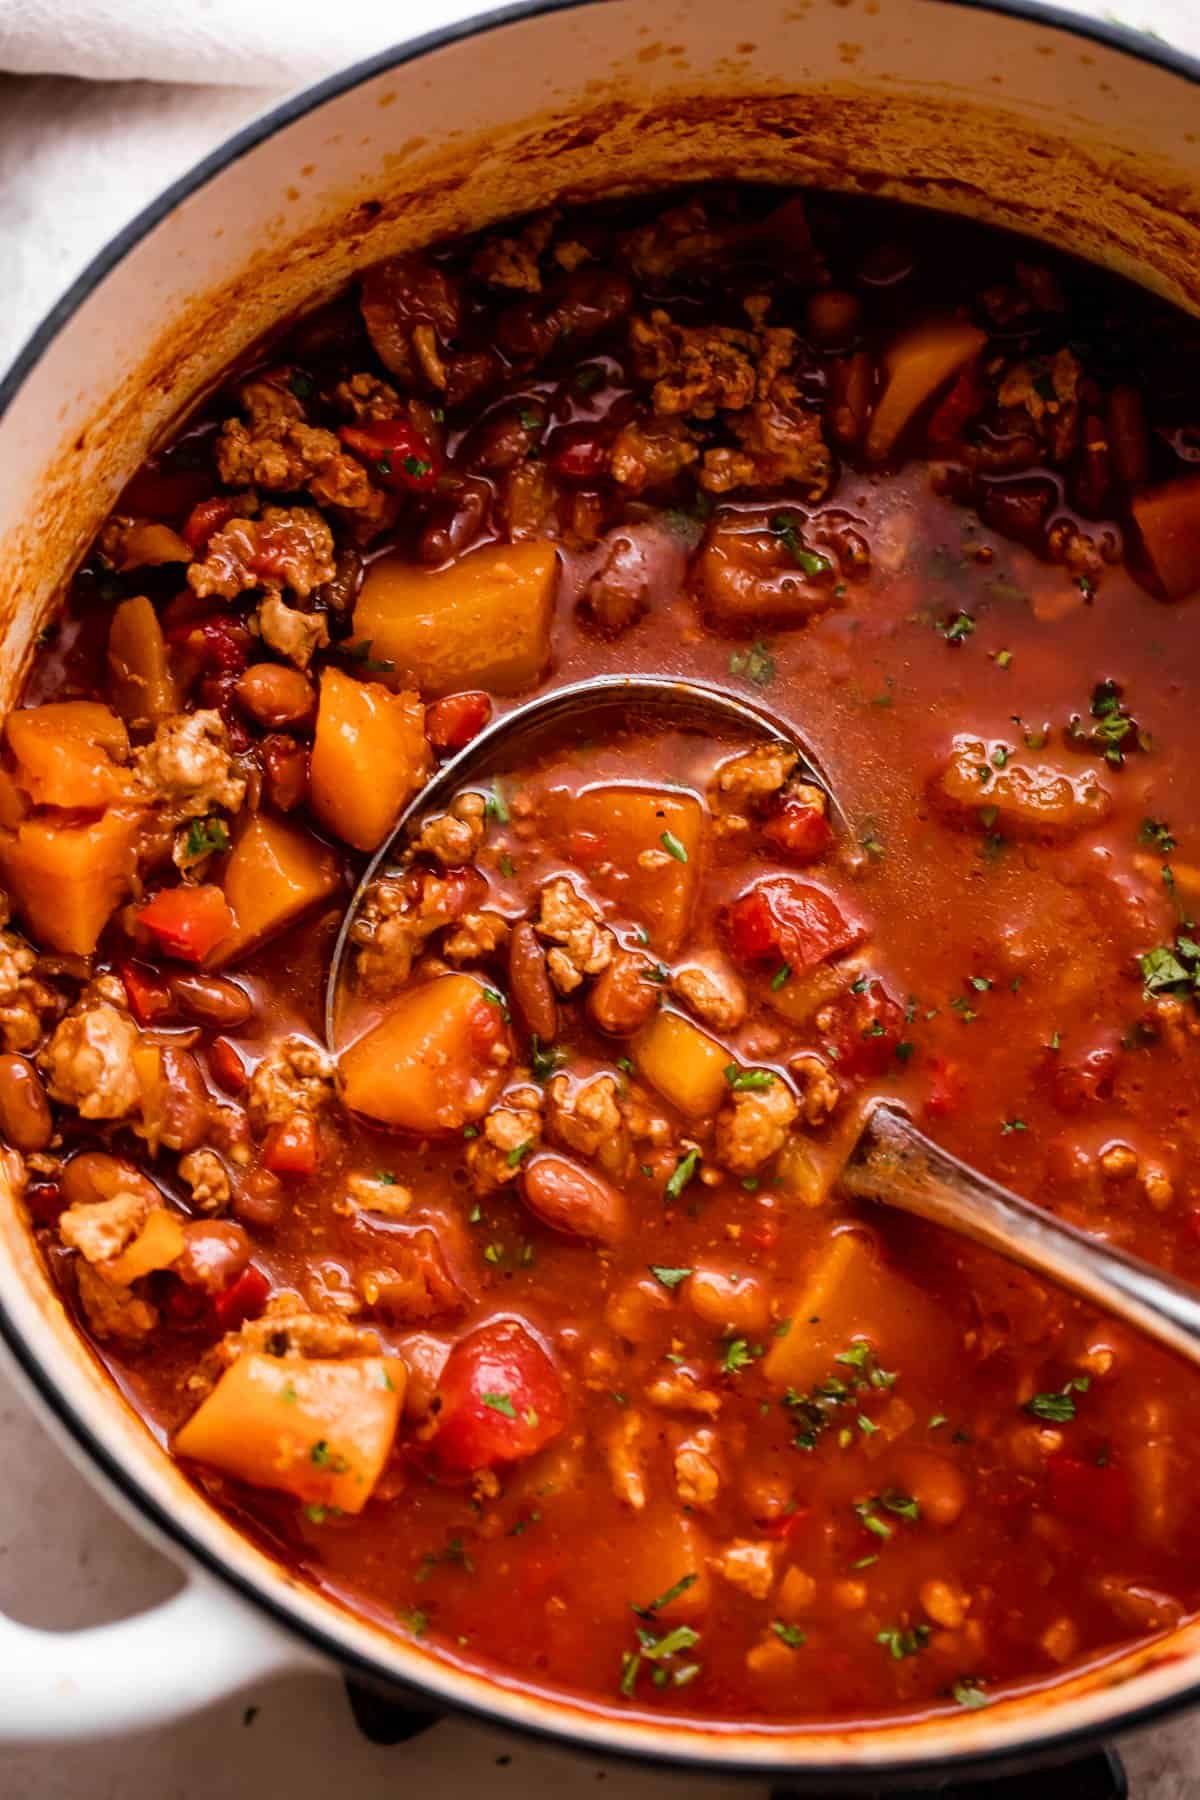 Overhead shot of a soup pot with cooked turkey chili with butternut squash in a tomato-based broth.